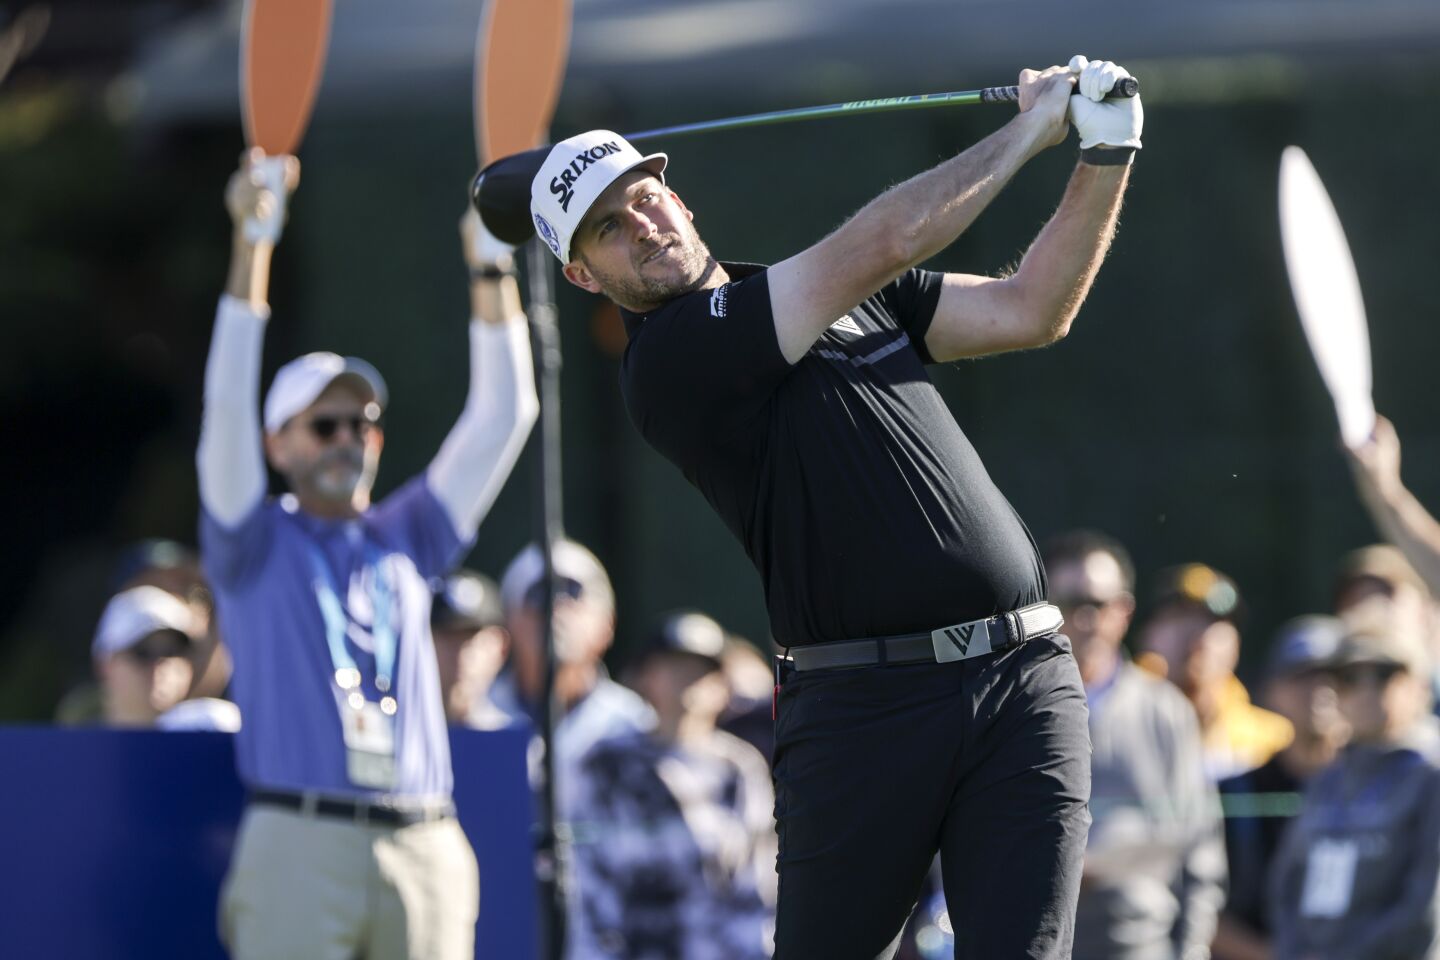 Taylor Pendrith hits a drive from the first tee during the second round of the Farmers Insurance Open on Jan. 27.